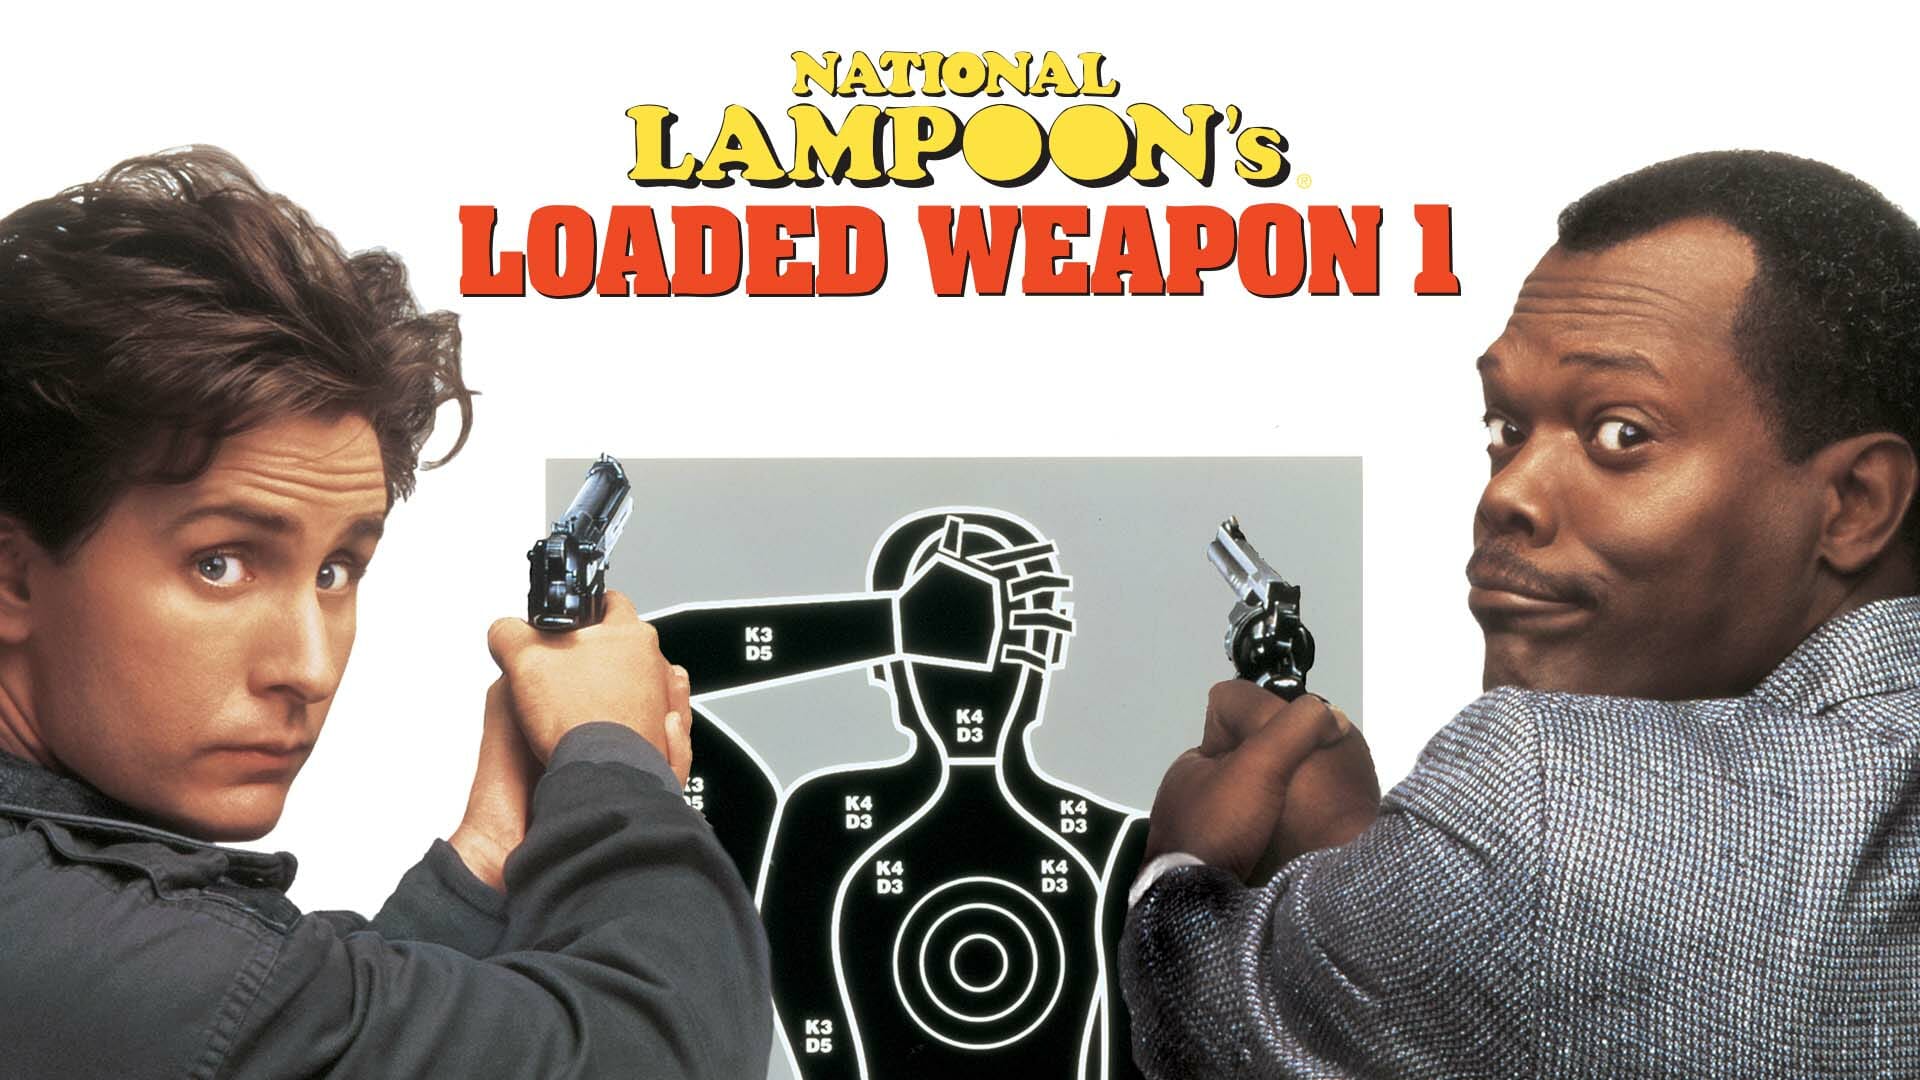 National Lampoon’s Loaded Weapon